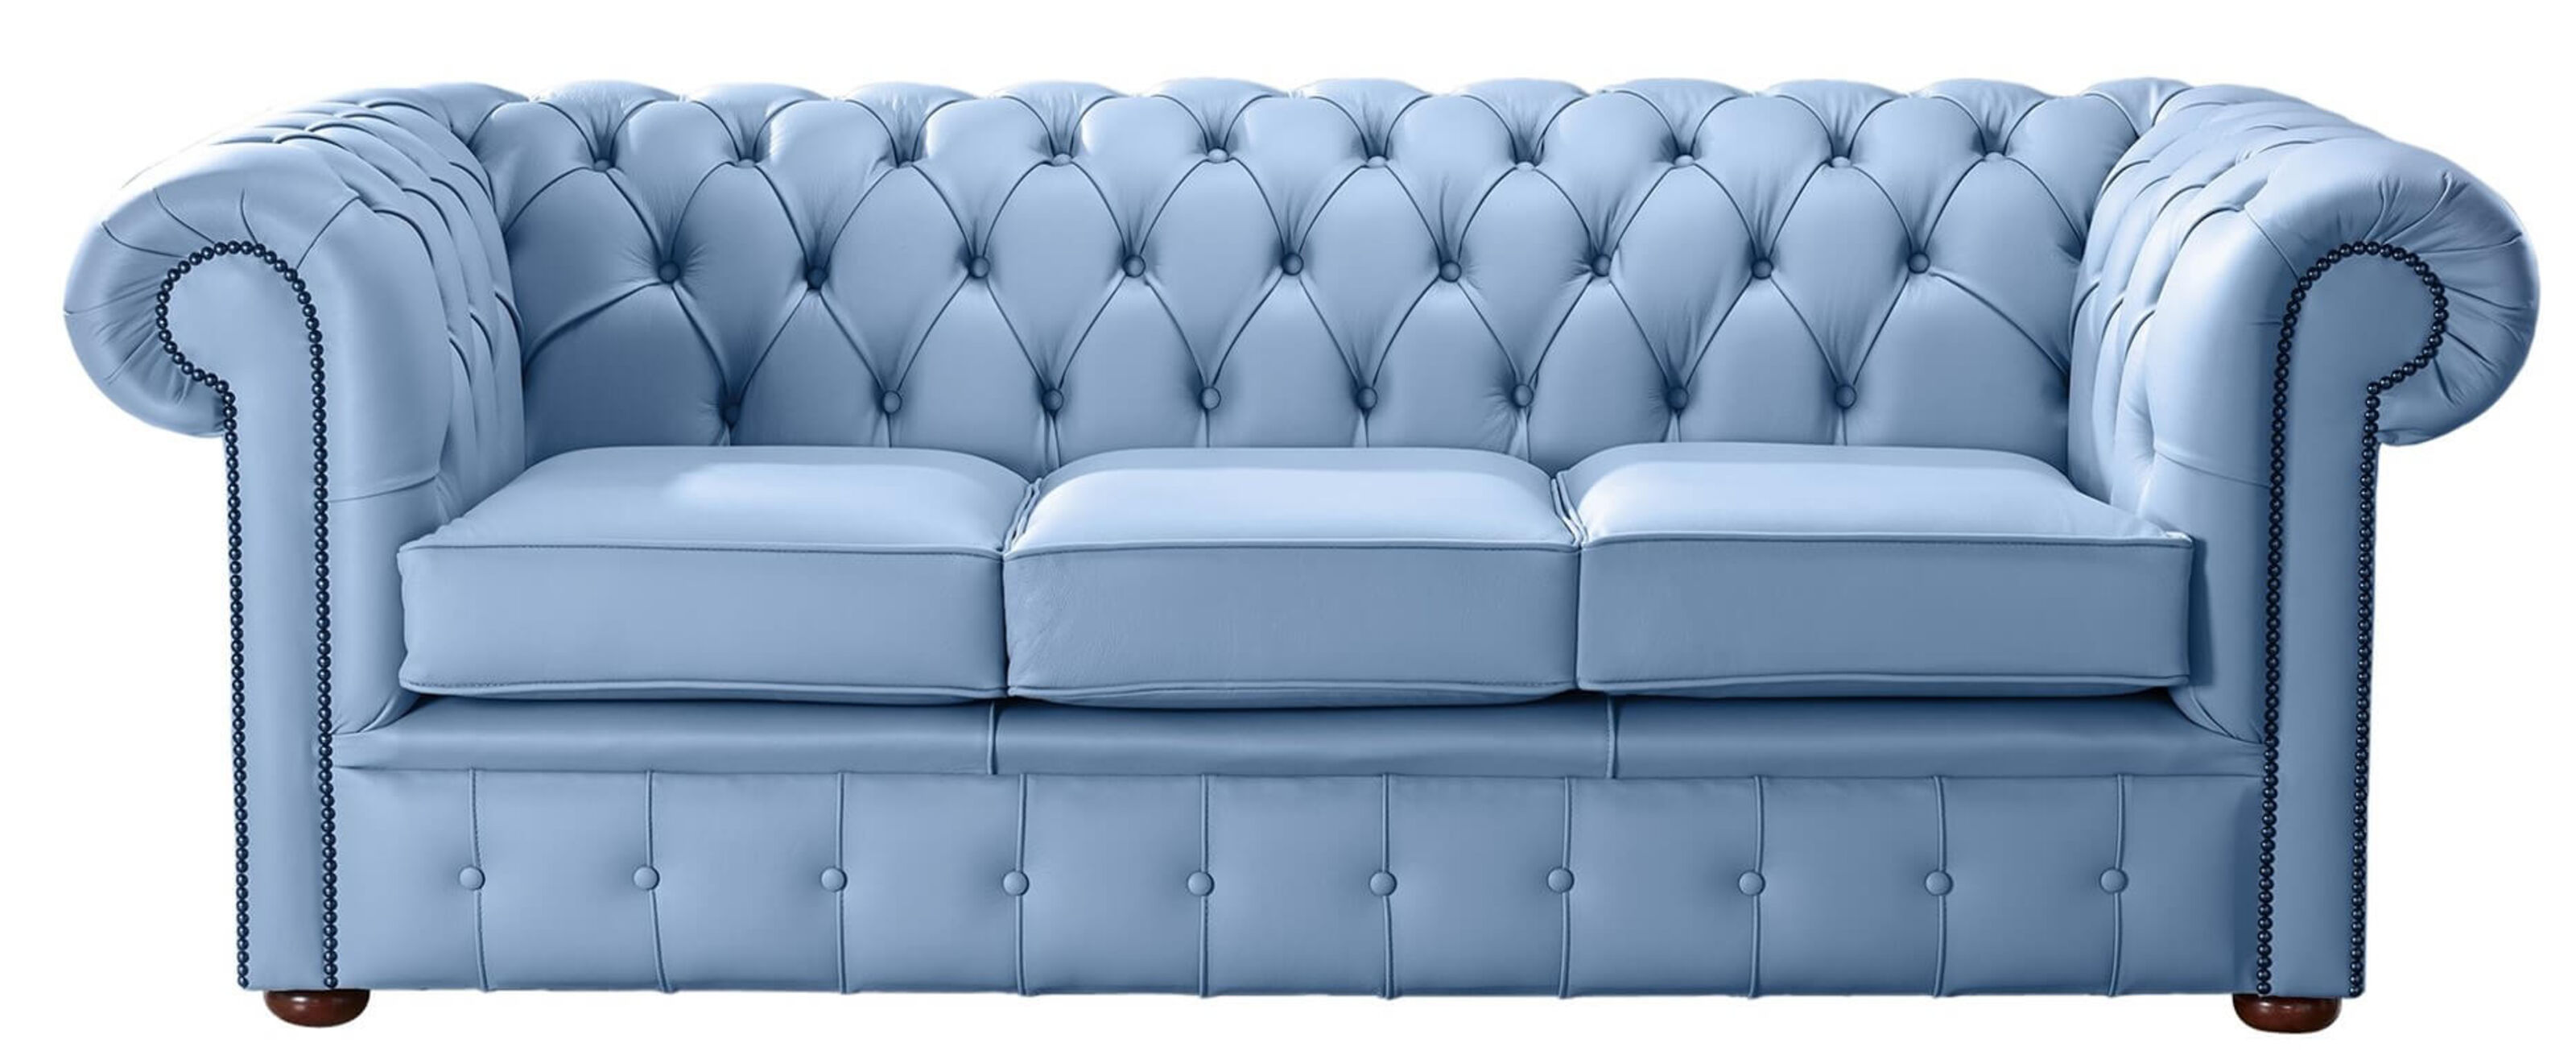 Luxury Lounging Chesterfield Sofa with Chaise Options  %Post Title